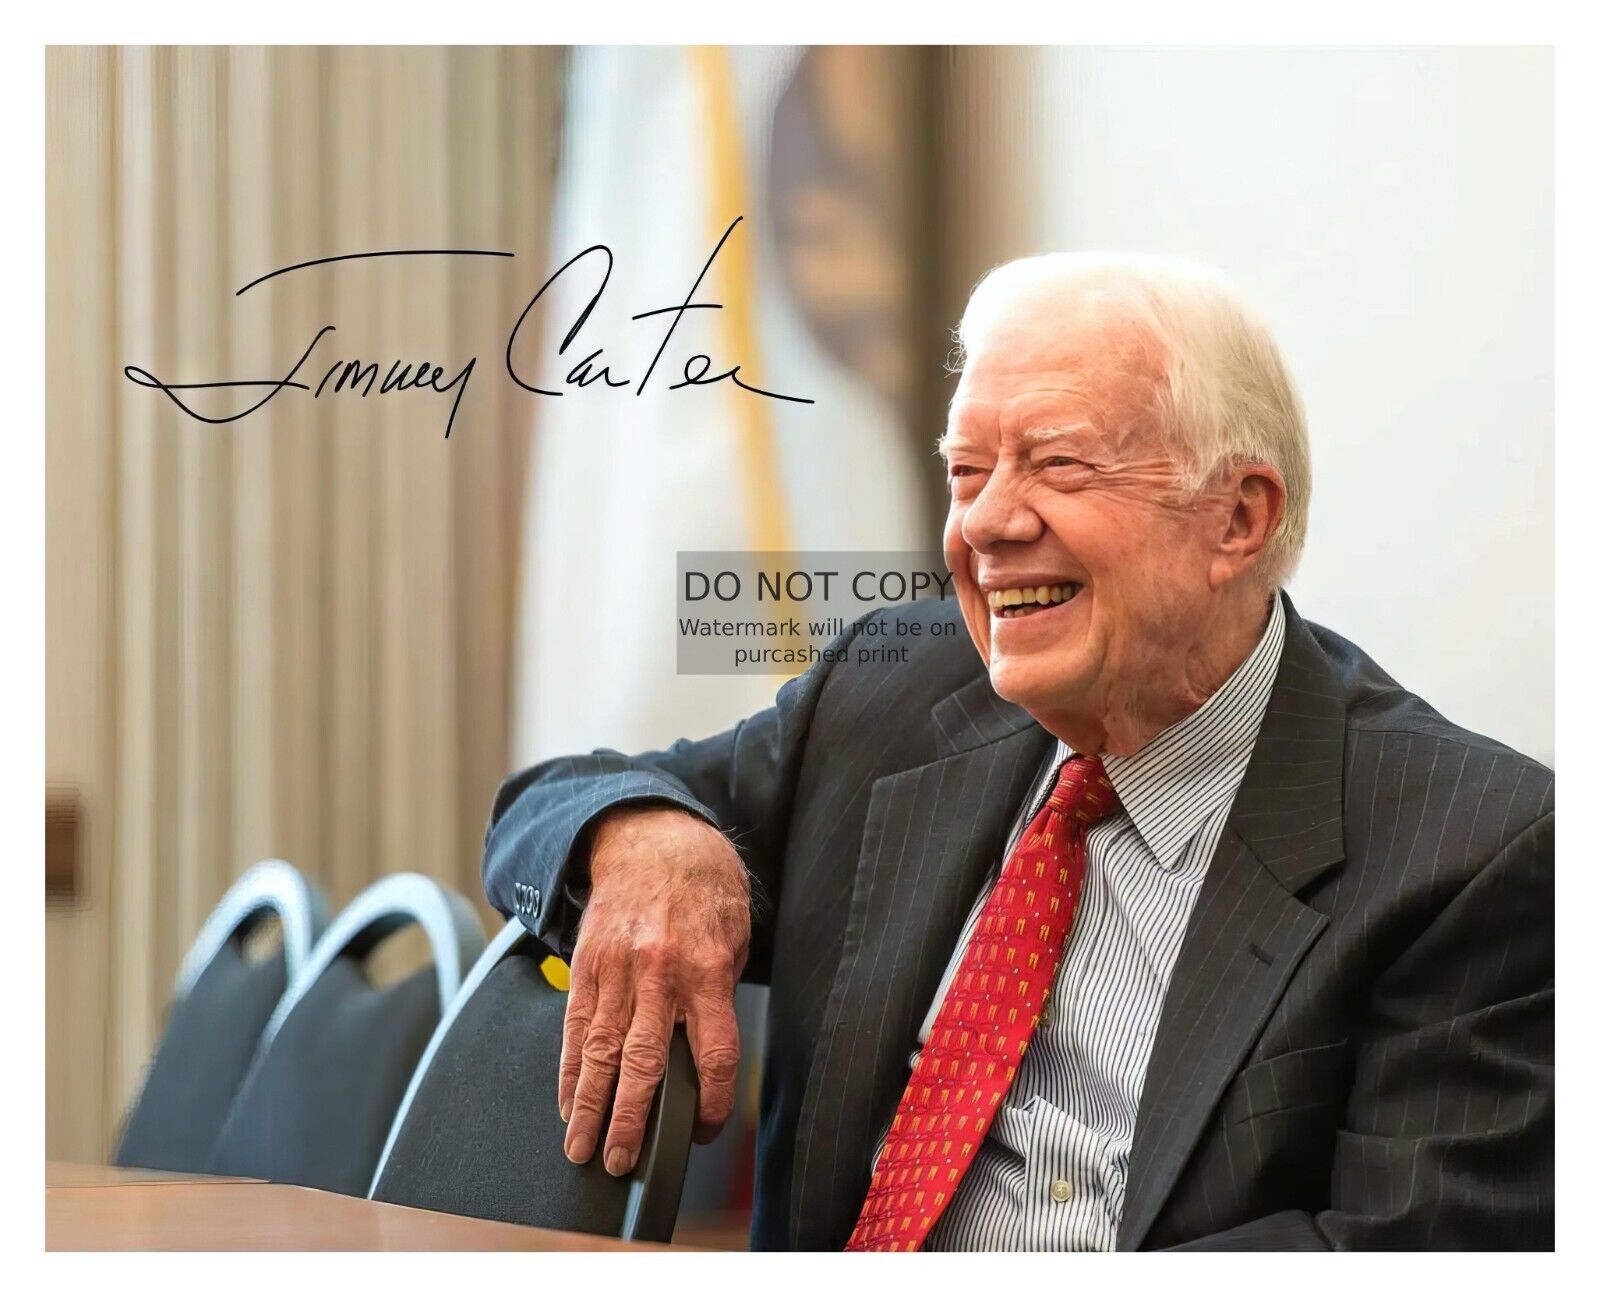 PRESIDENT JIMMY CARTER SMILING AUTOGRAPHED SIGNED 8X10 PHOTO